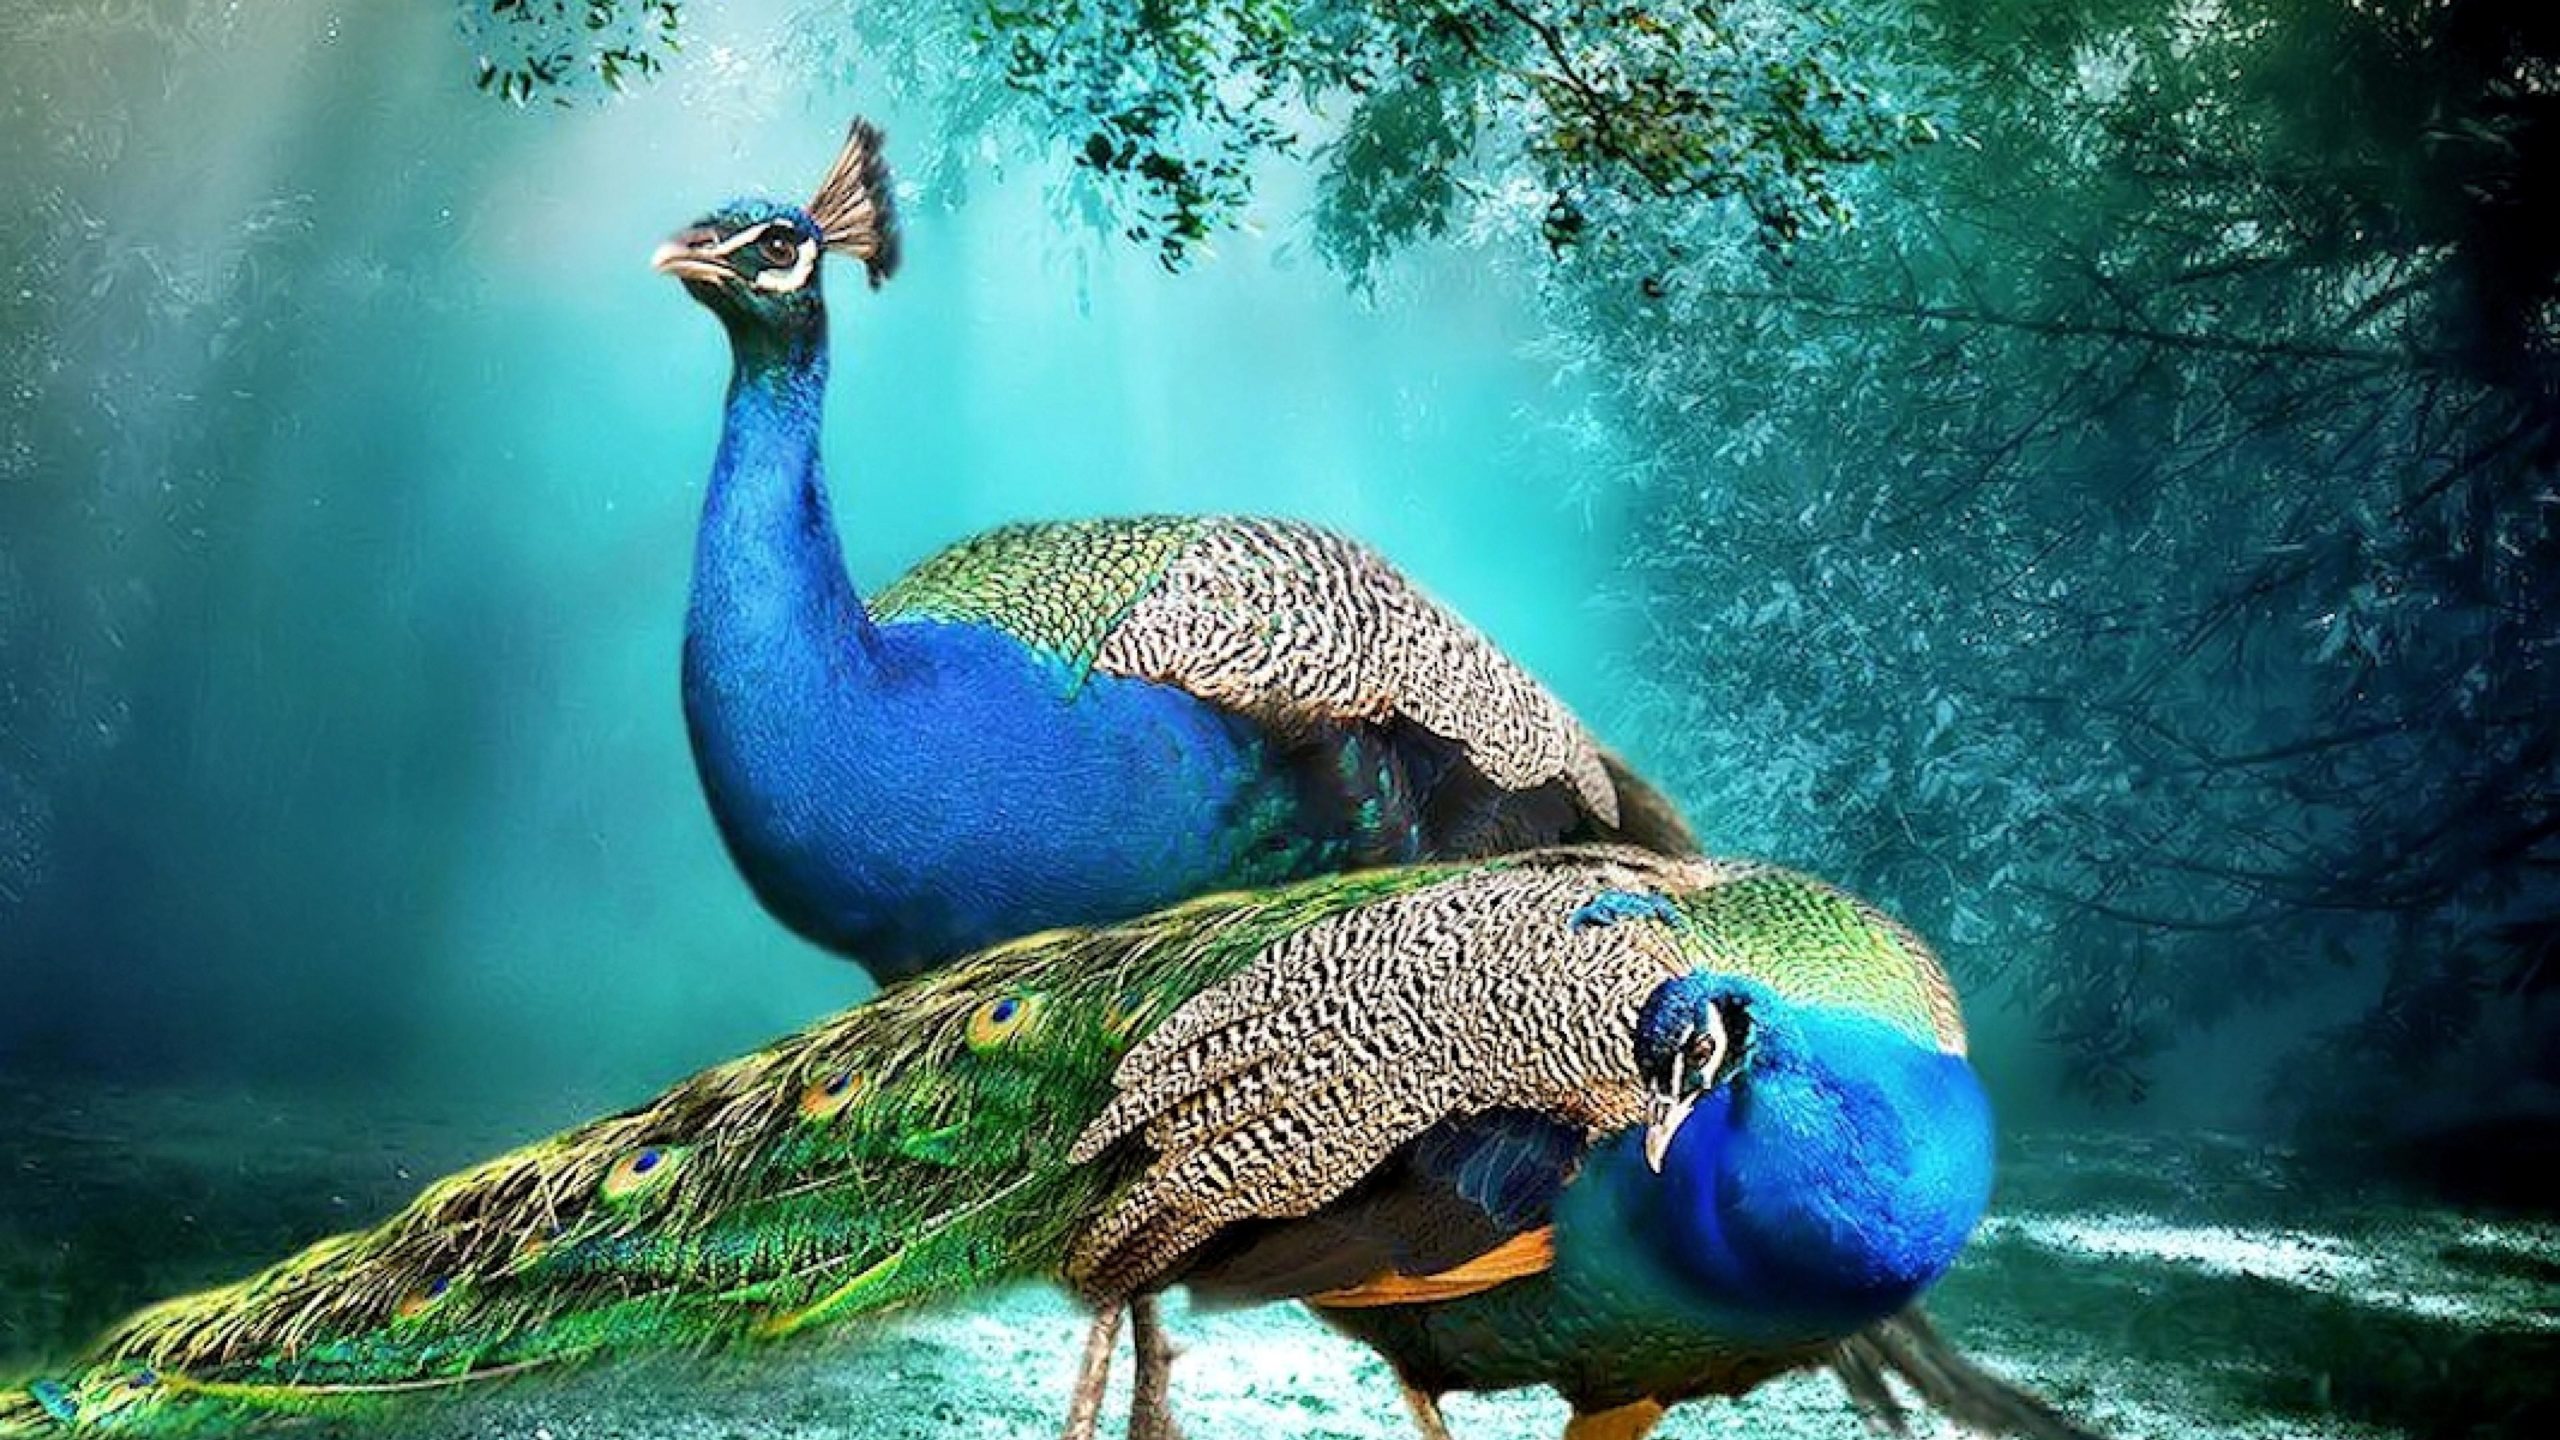 hd images of peacock